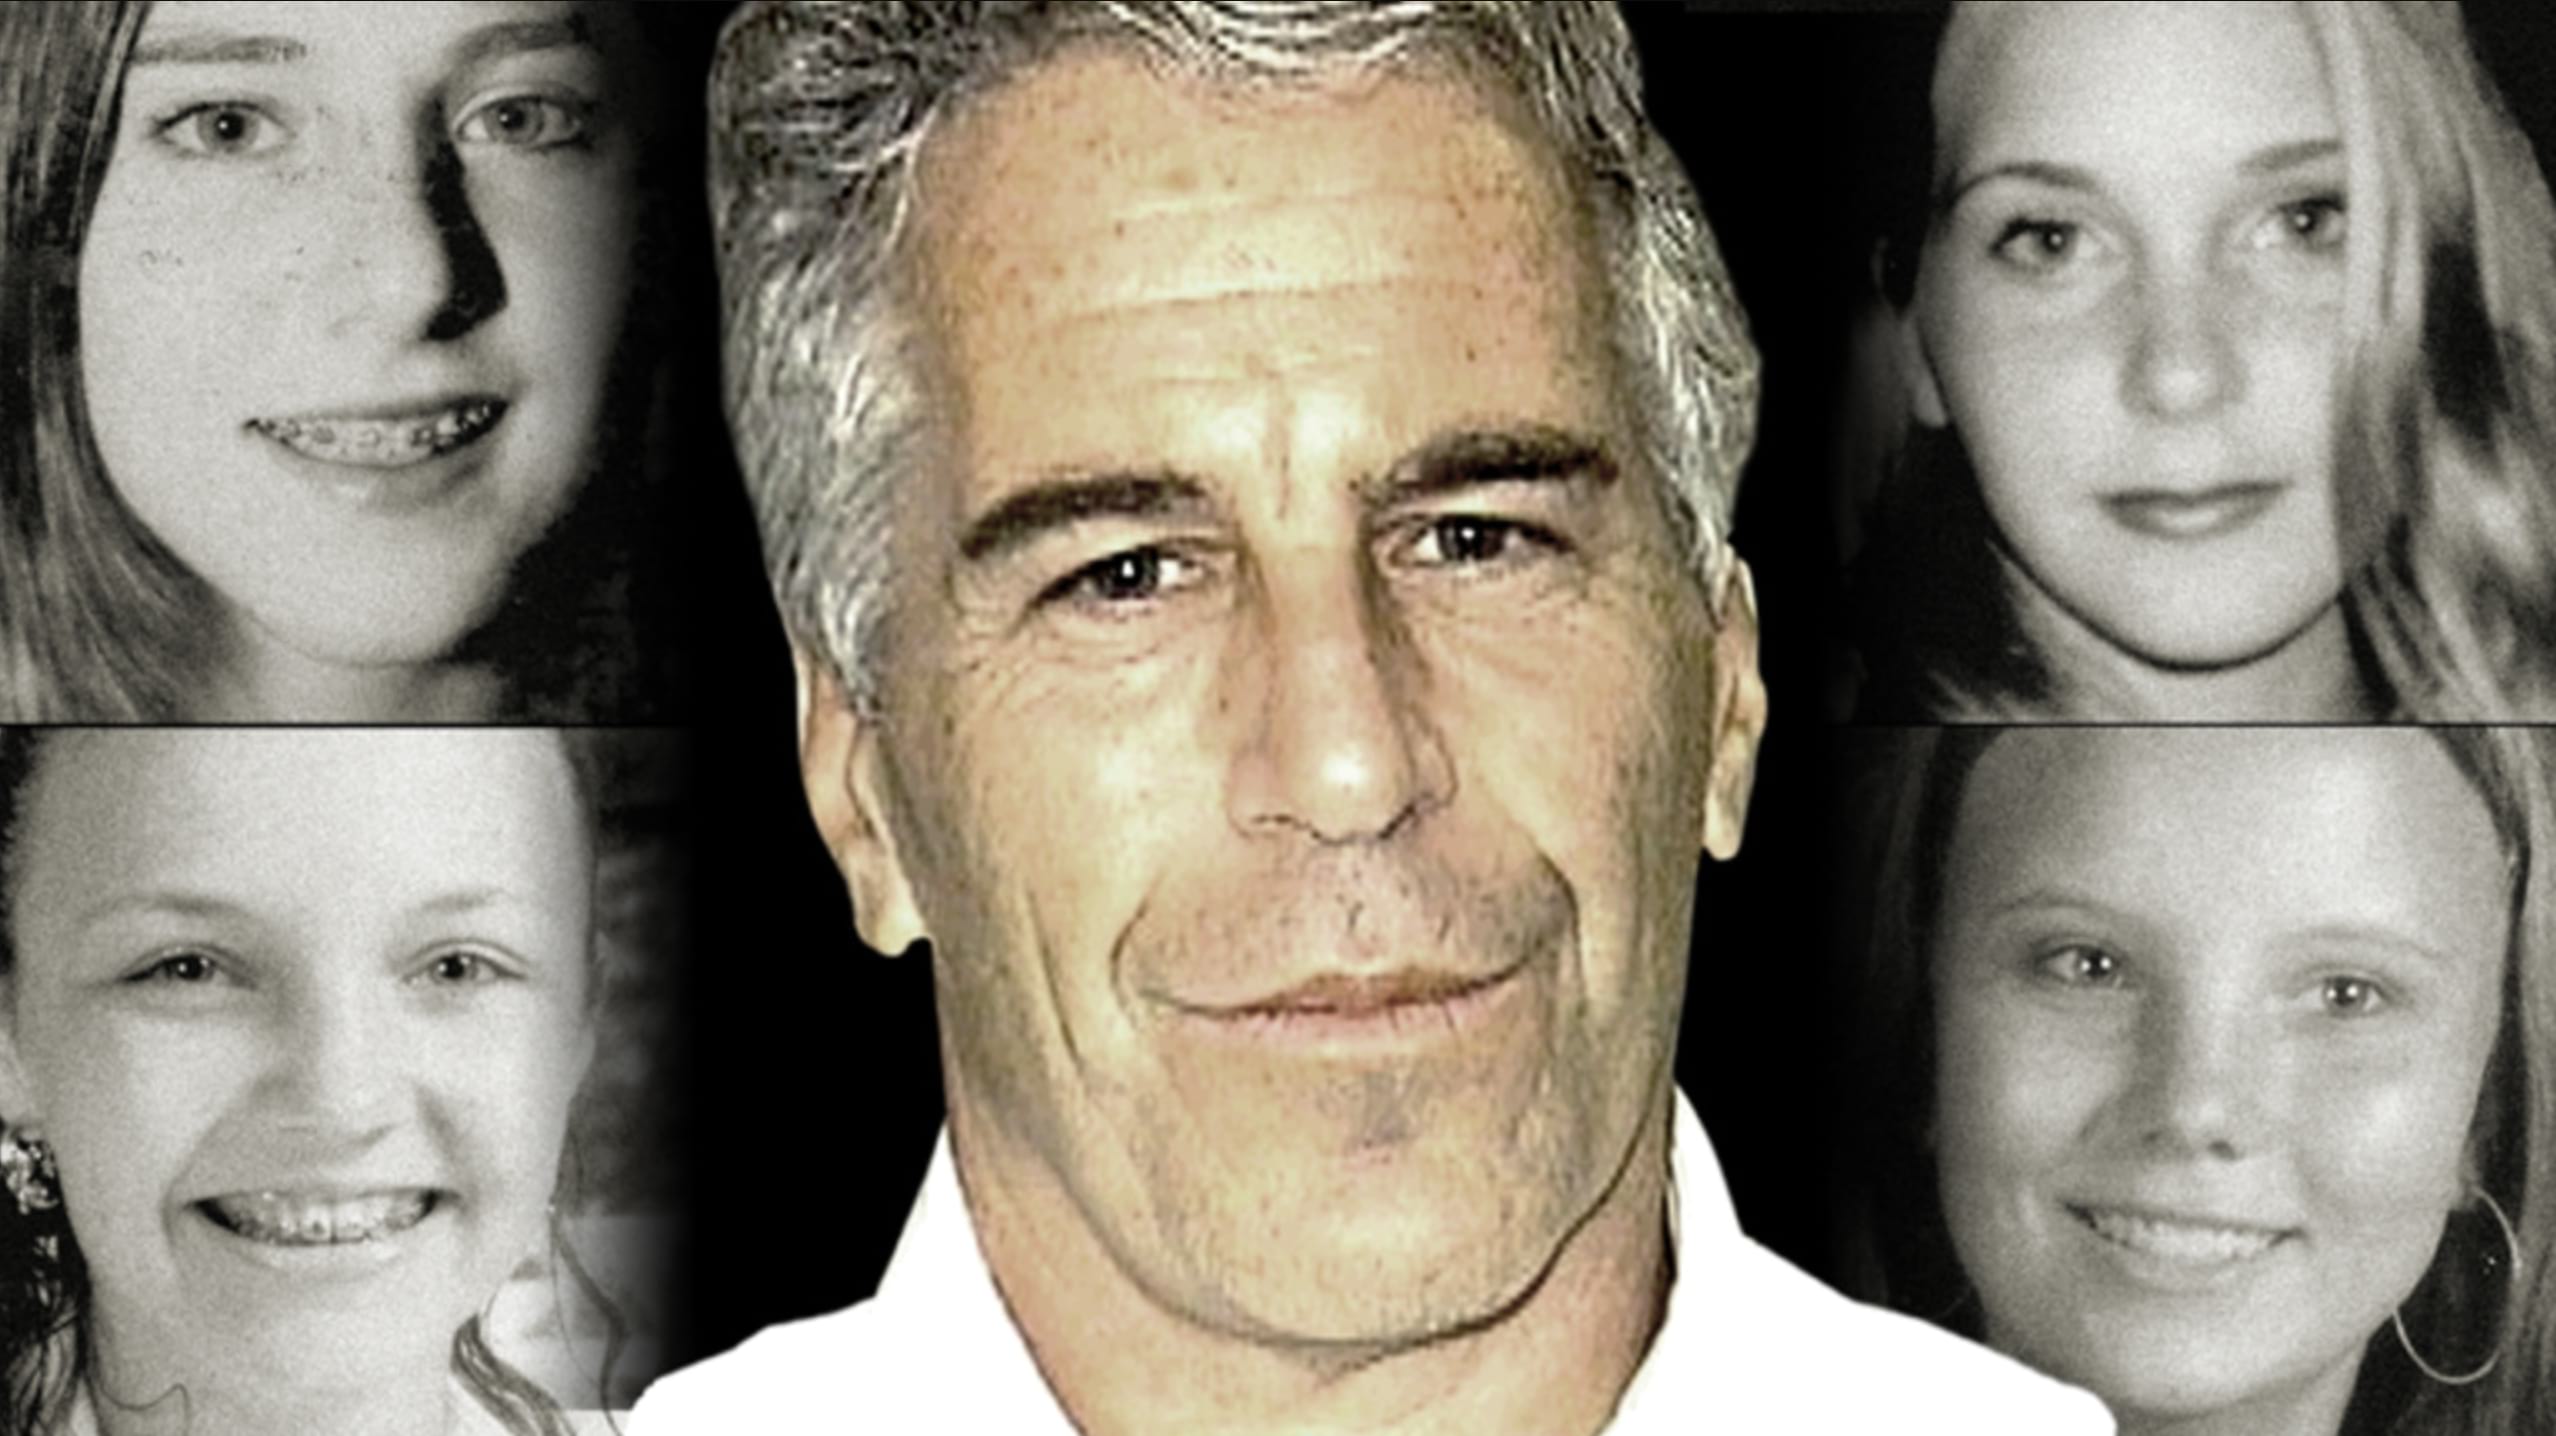 Dozens of court docs relating to eight of pedophile Jeffrey Epstein's associates - including billionaire hotel magnate and female Brit - will be UNSEALED after judge rules public interest outweighs right to privacy